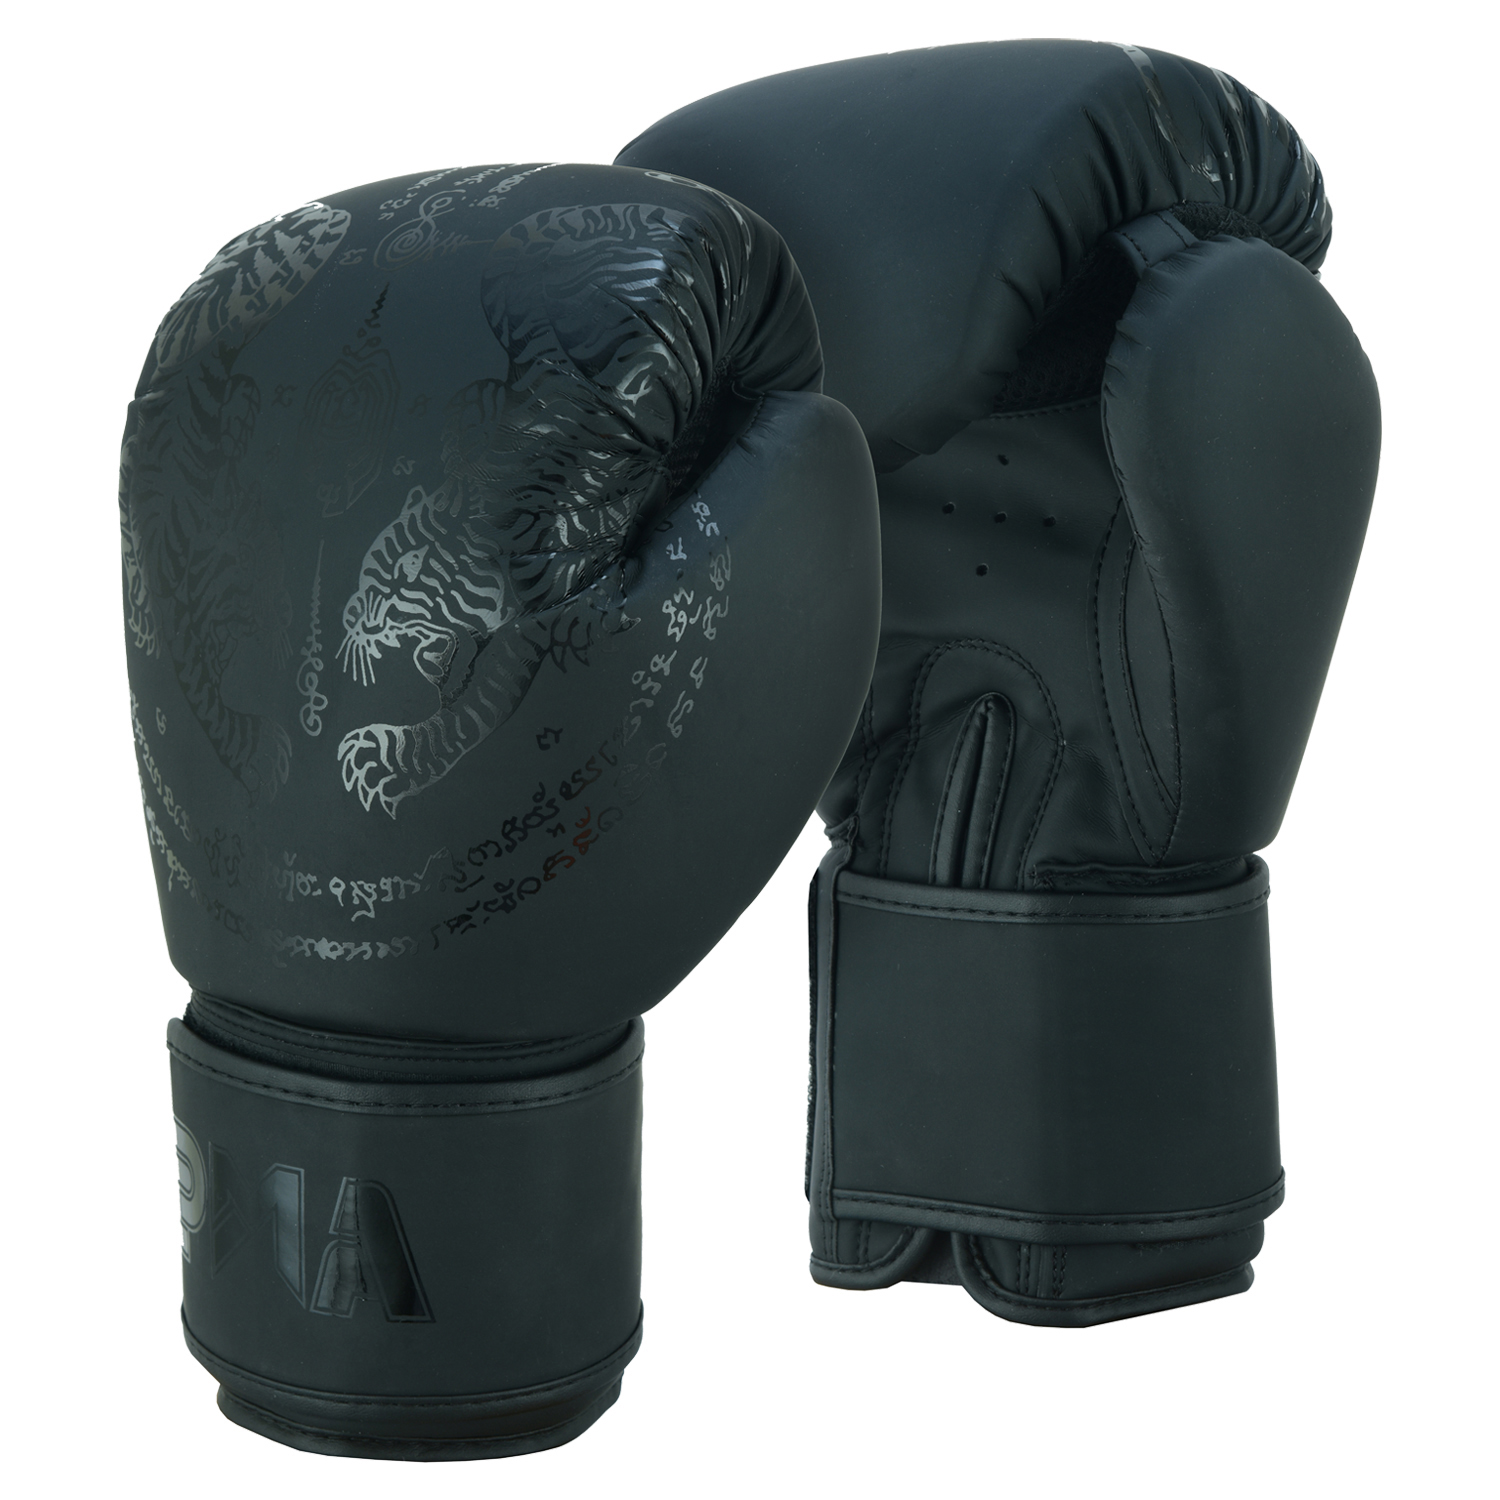 Playwell Matte Black "Twin Tiger" Boxing Gloves - Click Image to Close